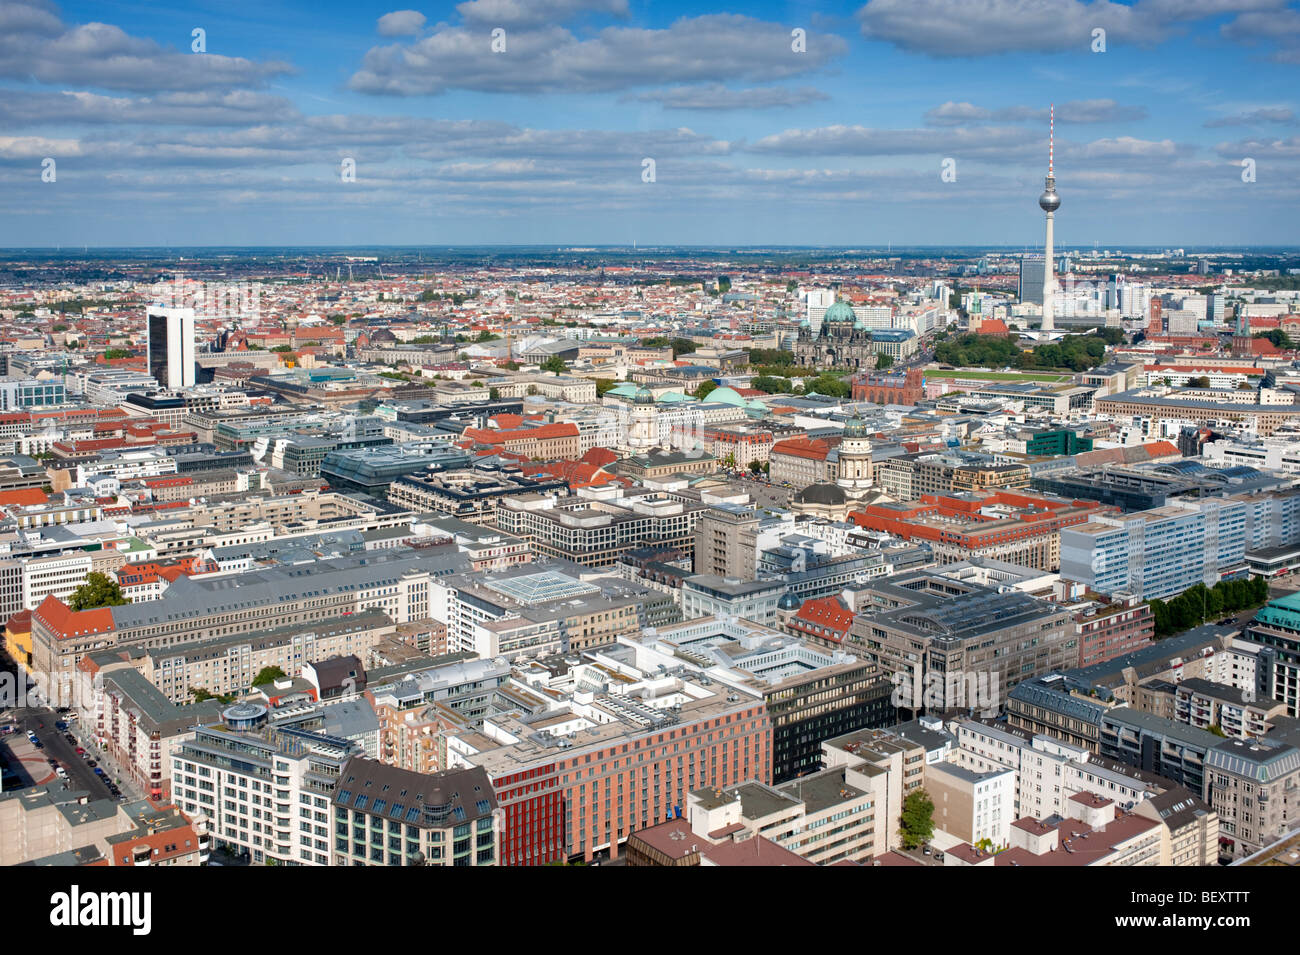 Cityscape of Mitte in Berlin with Television Tower at Alexanderplatz Stock Photo